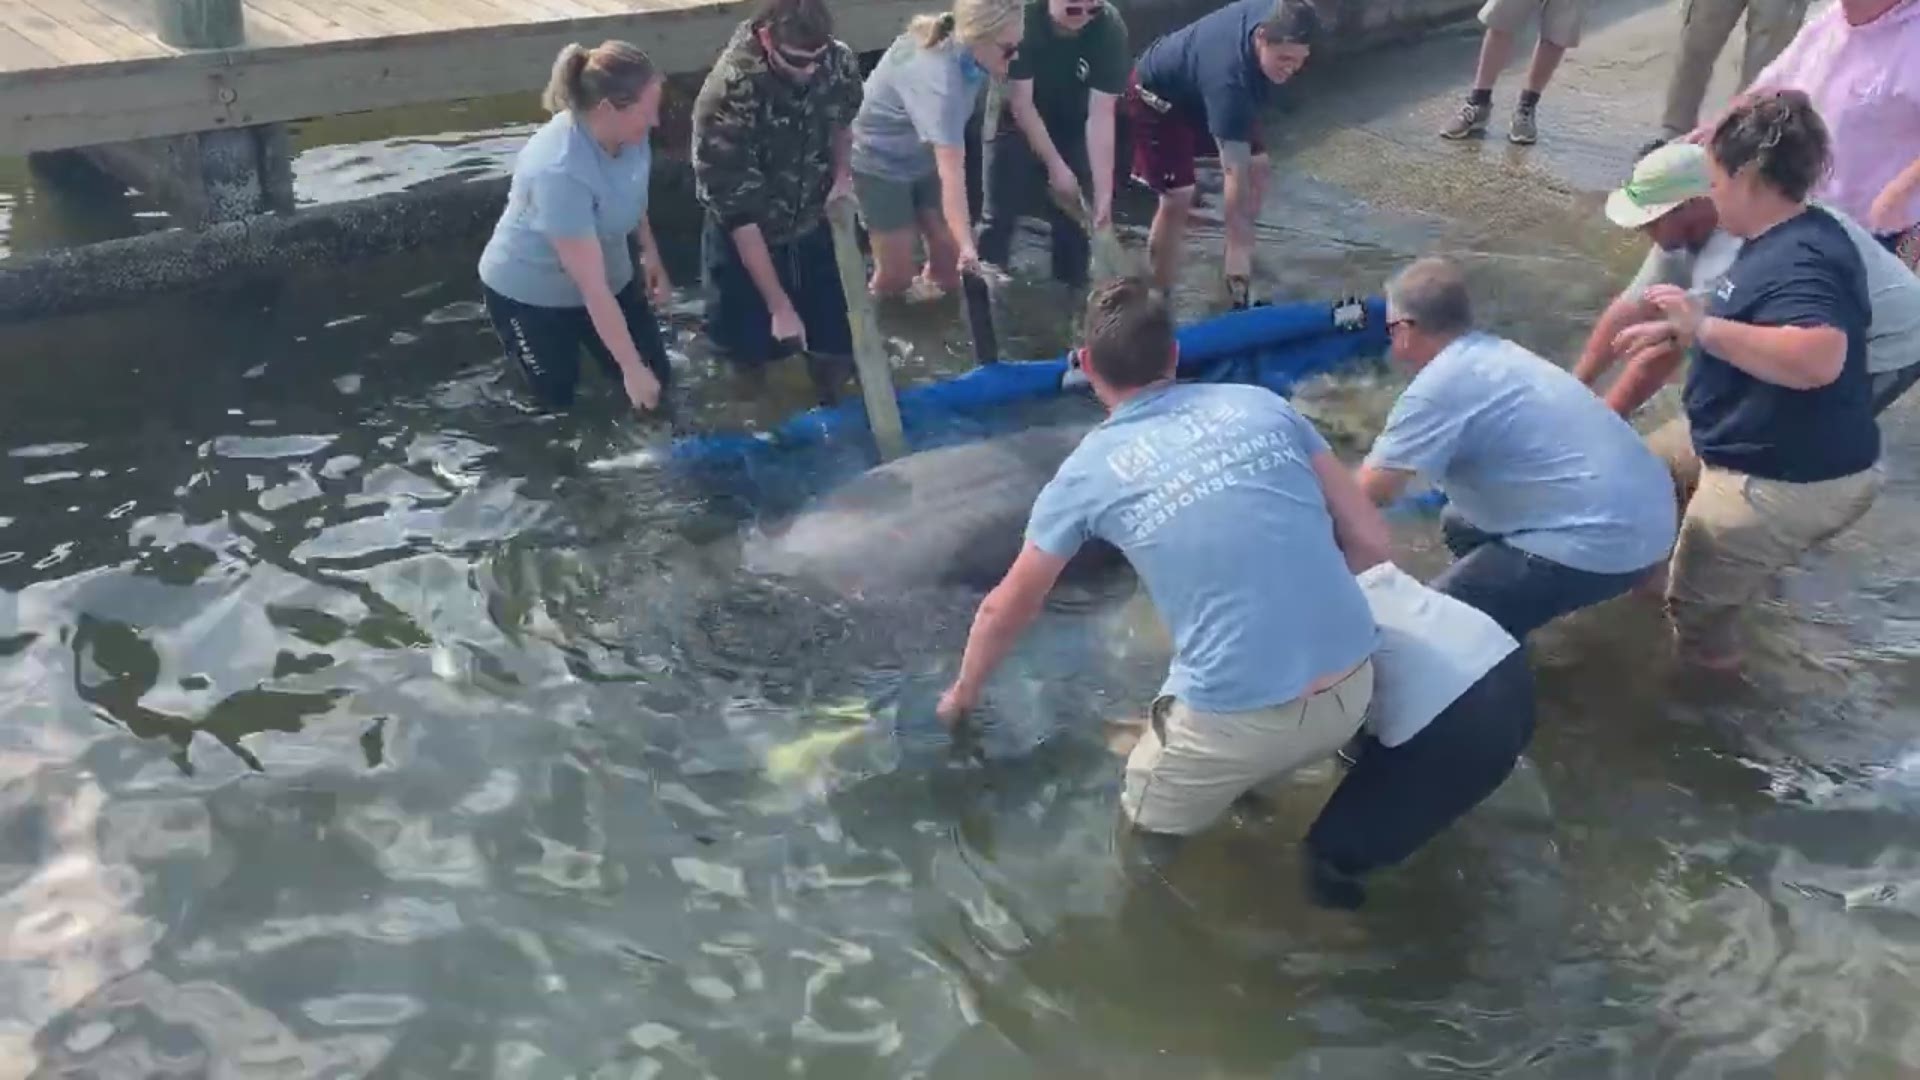 The manatee, named Crevasse, was rescued Nov. 21 after he was discovered by members of the U.S. Navy when he was beached on the Mayport shoreline.